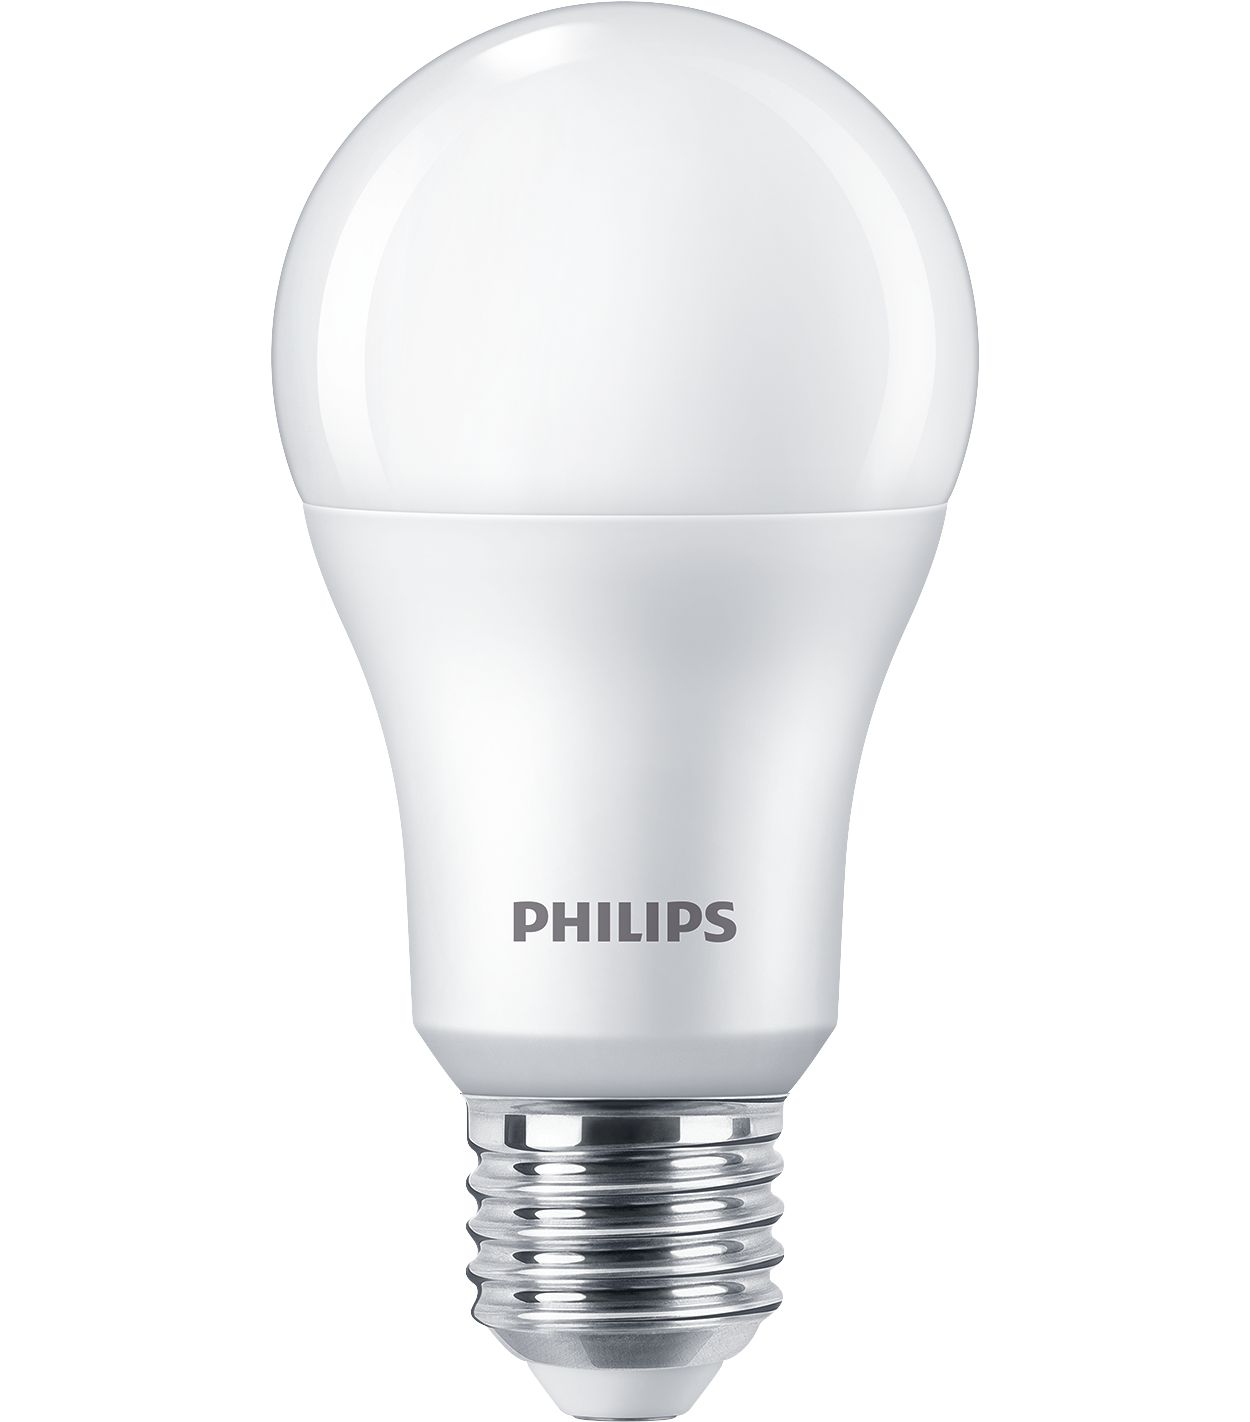 State-of-the-art LED light bulb for the home